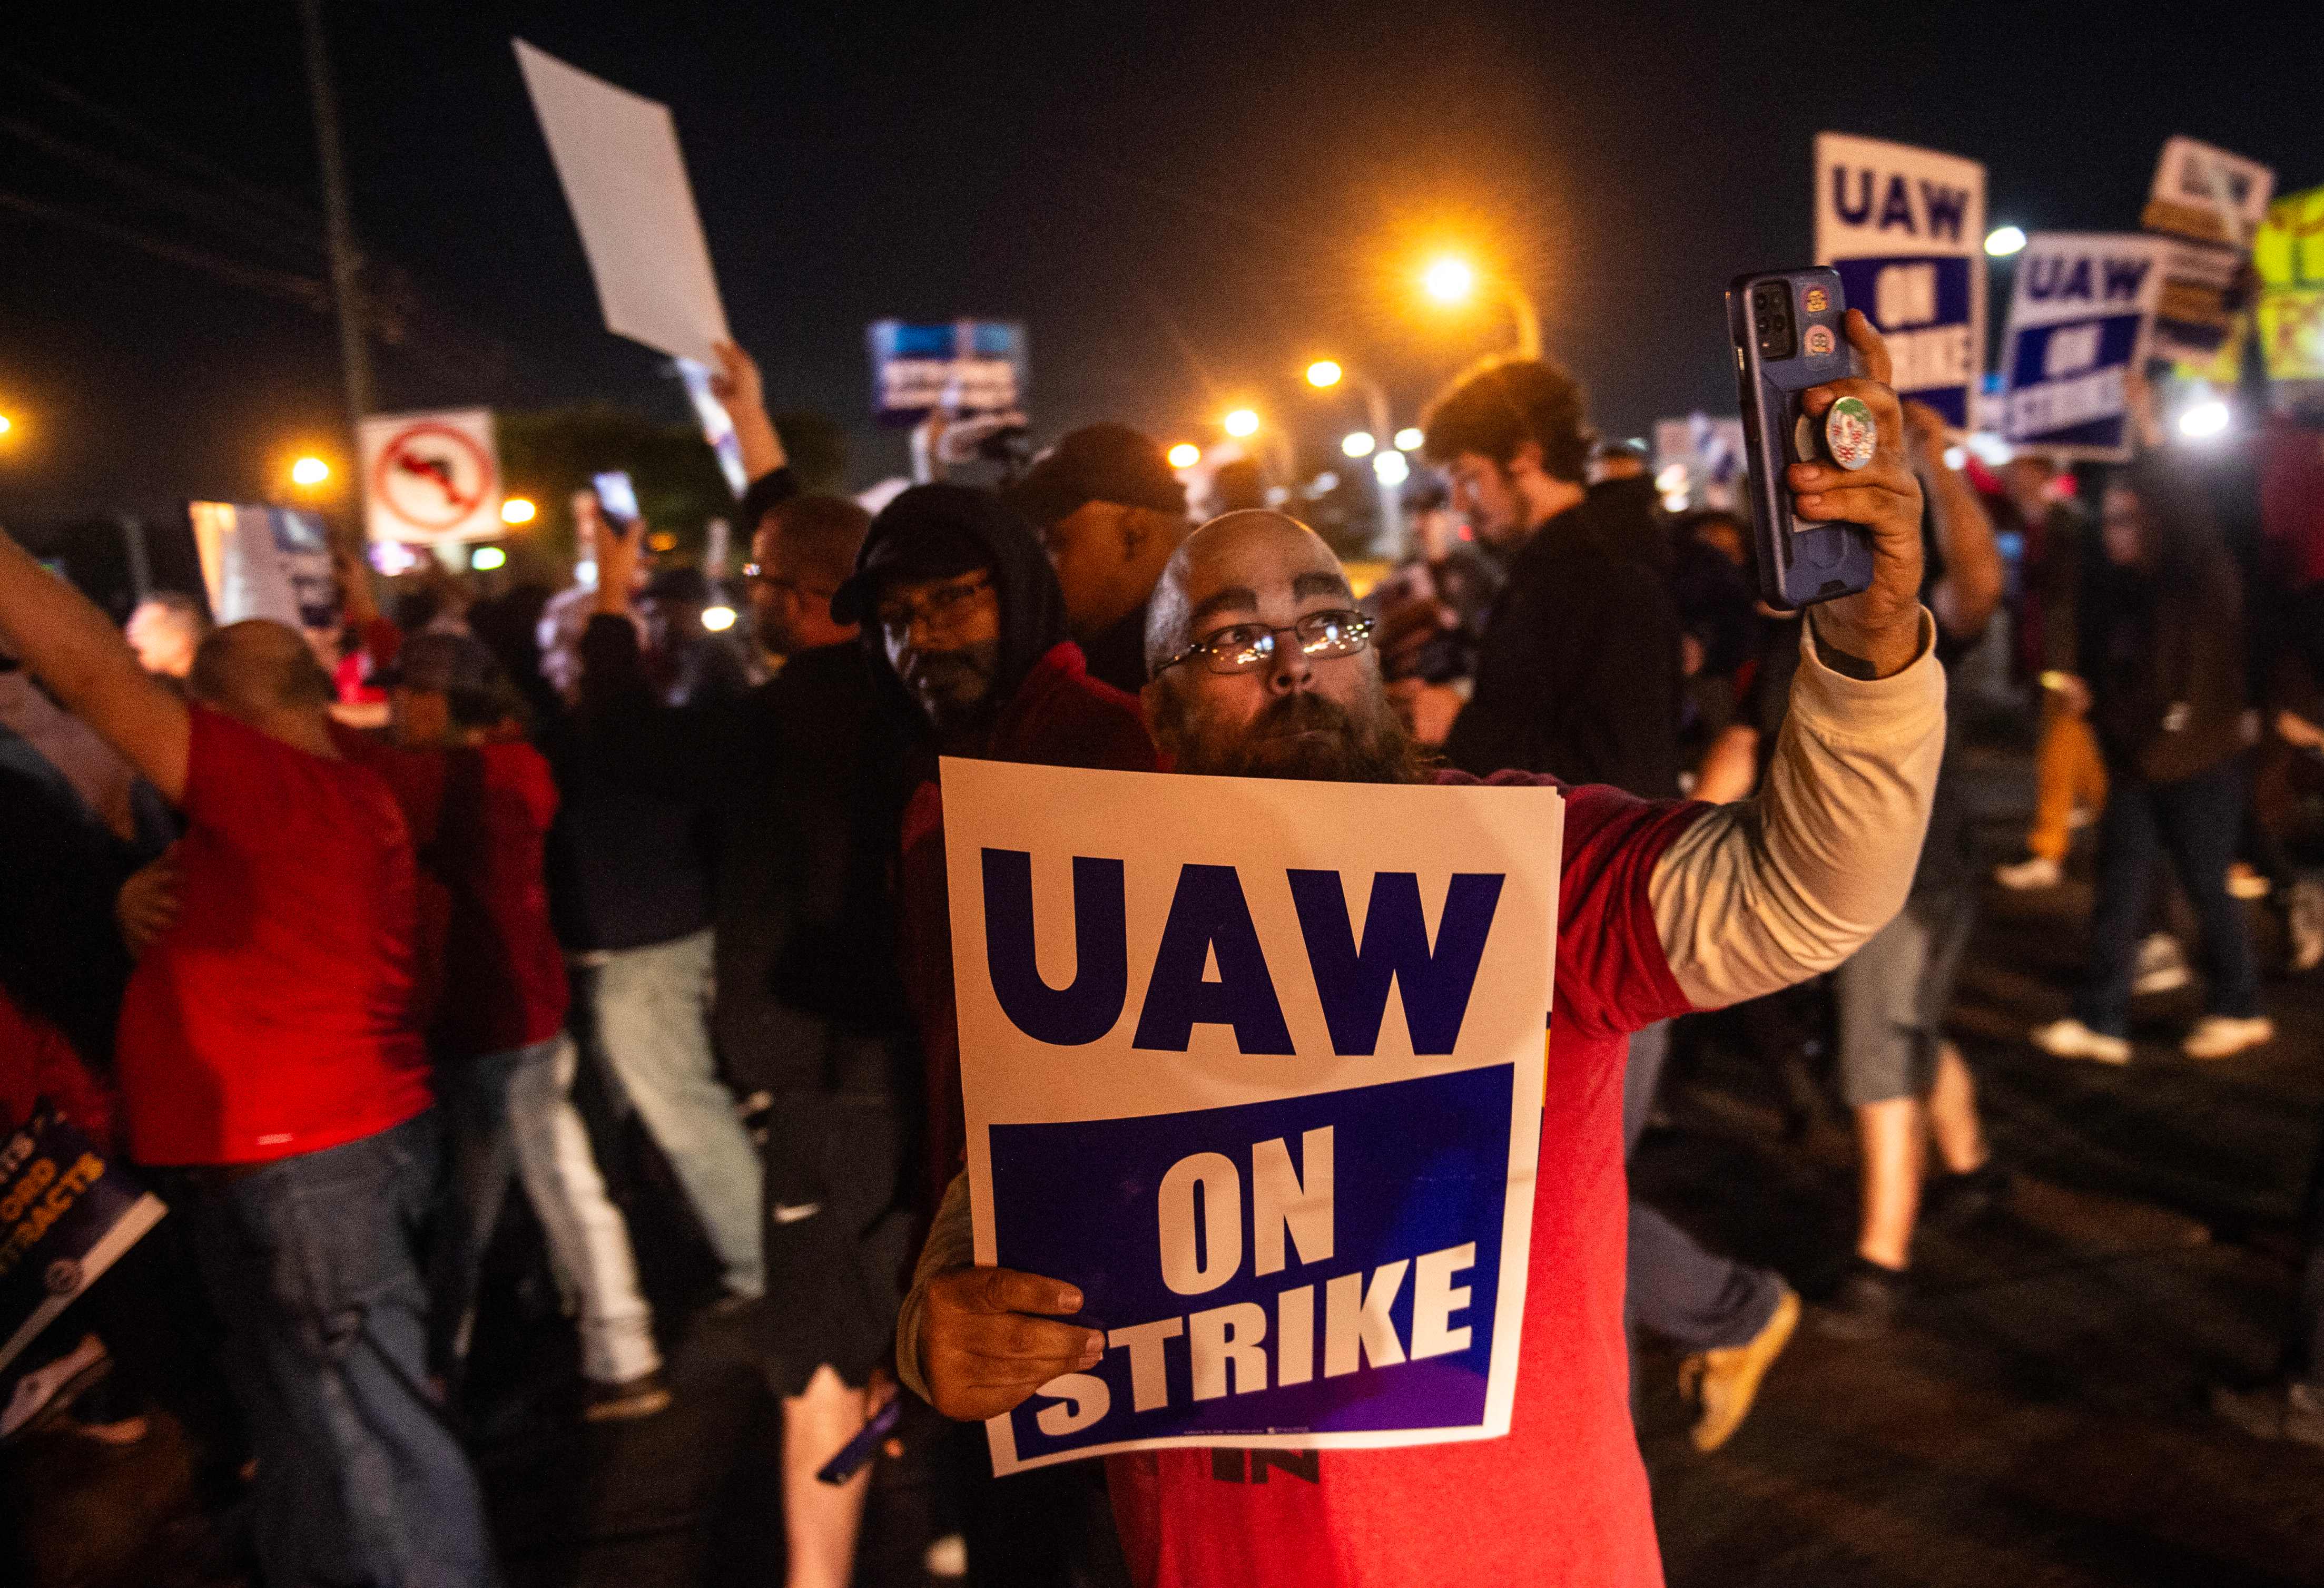 Members of theUnited Auto Workers picket and hold signs outside of the UAW Local 900 headquarters across the street from the Ford Assembly Plant in Wayne, Michigan on 15 September.